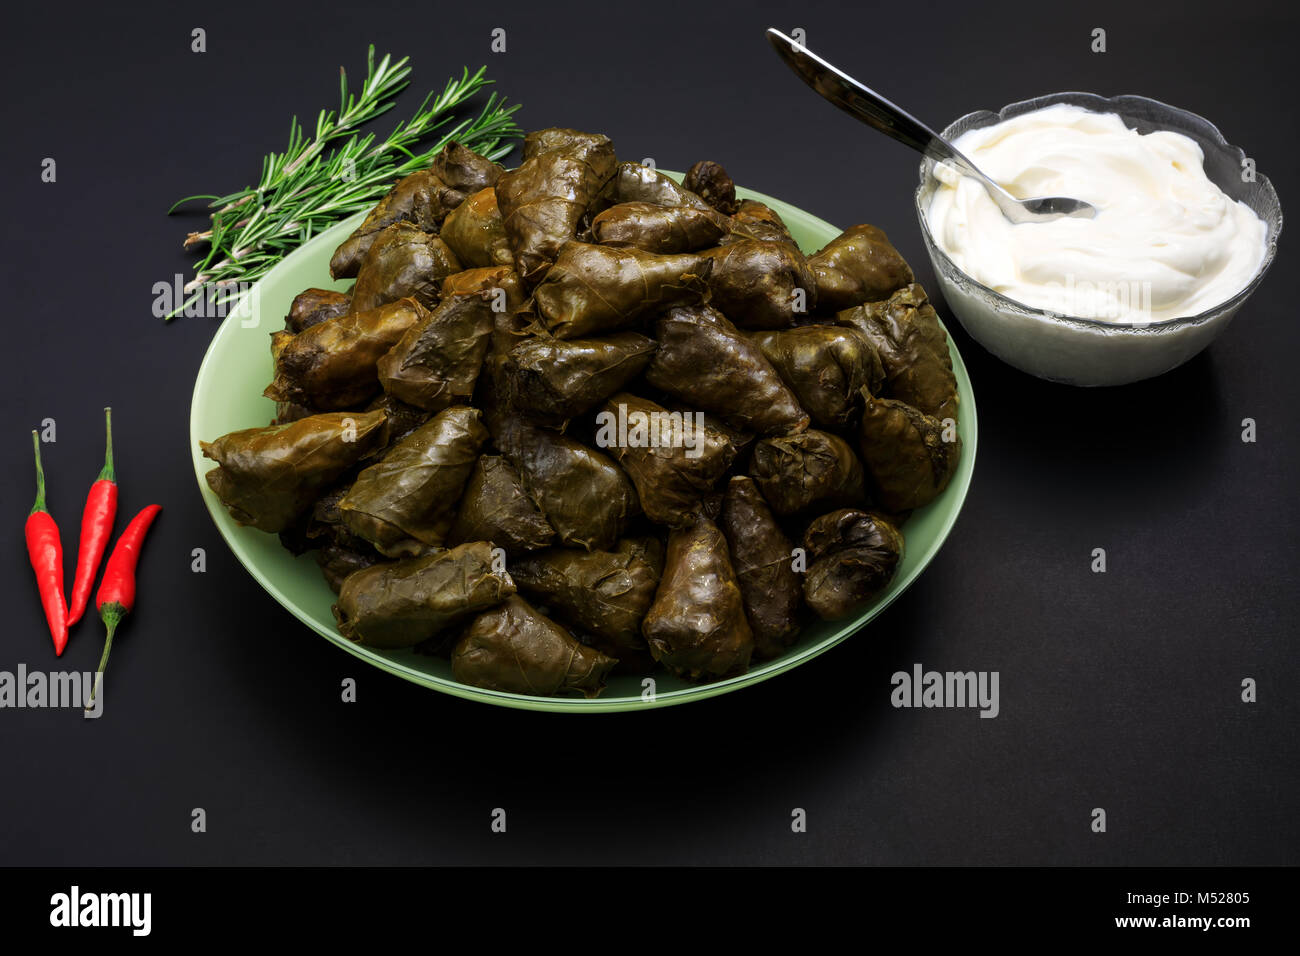 Sarmale, dolma, sarma, golubtsy or golabki. Grape vines leaves stuffed with meat, rice and vegetables with sour cream. European traditional cuisine. Stock Photo